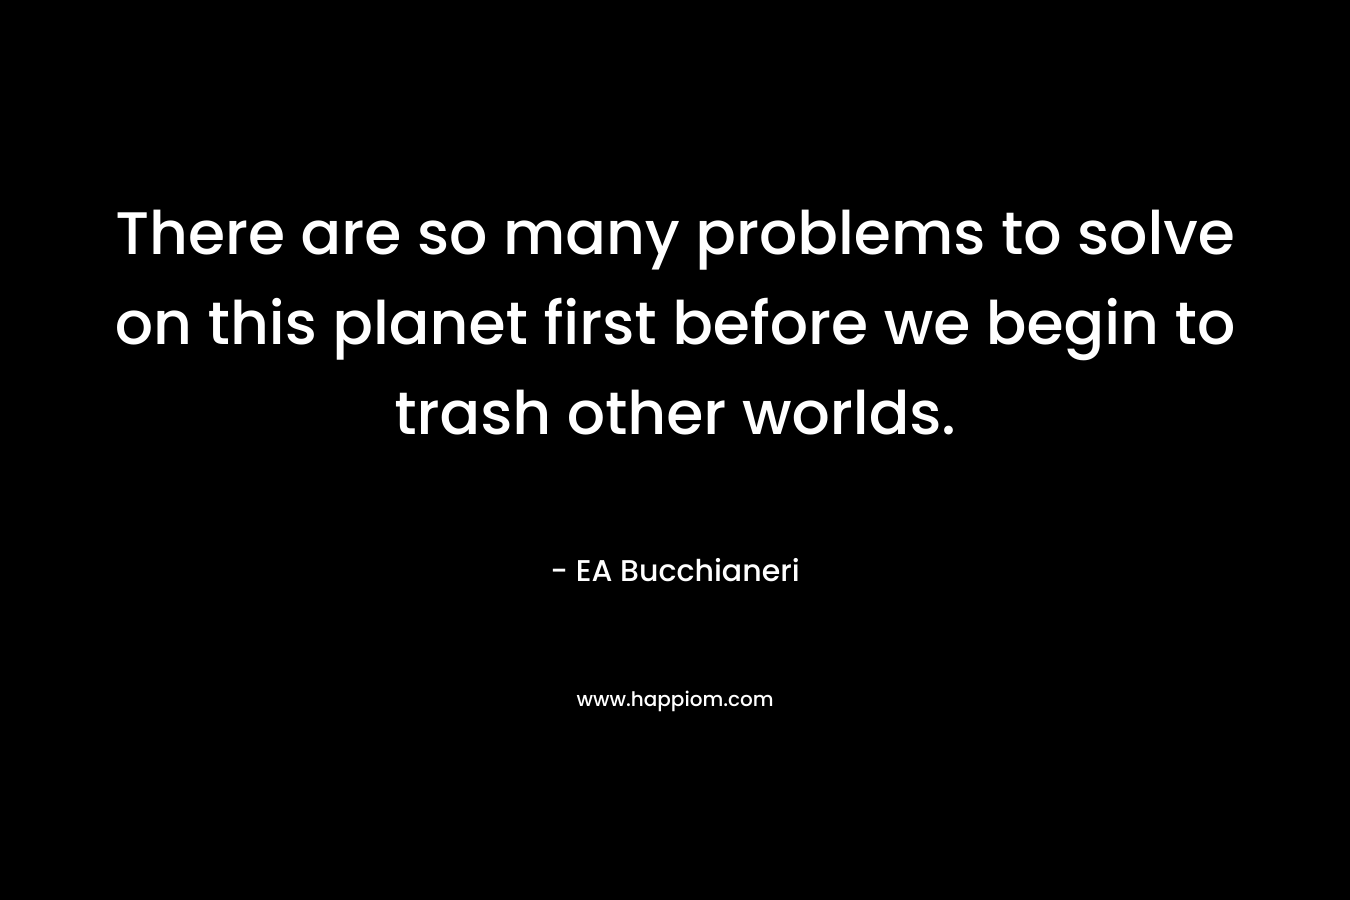 There are so many problems to solve on this planet first before we begin to trash other worlds. – EA Bucchianeri